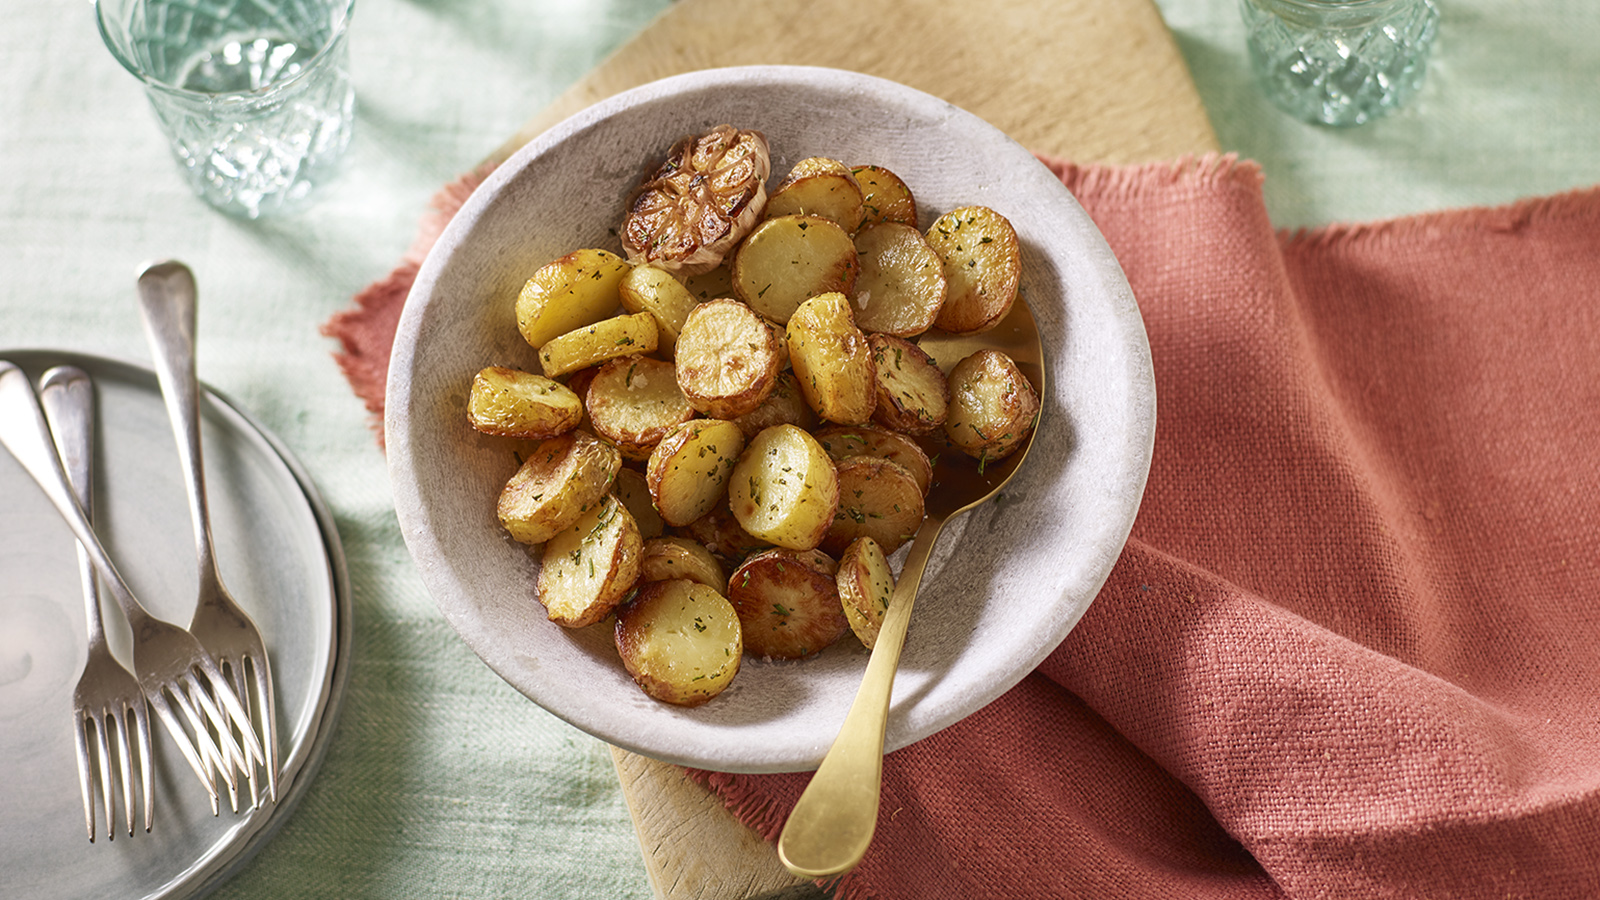 https://food-images.files.bbci.co.uk/food/recipes/roast_new_potatoes_with_11710_16x9.jpg